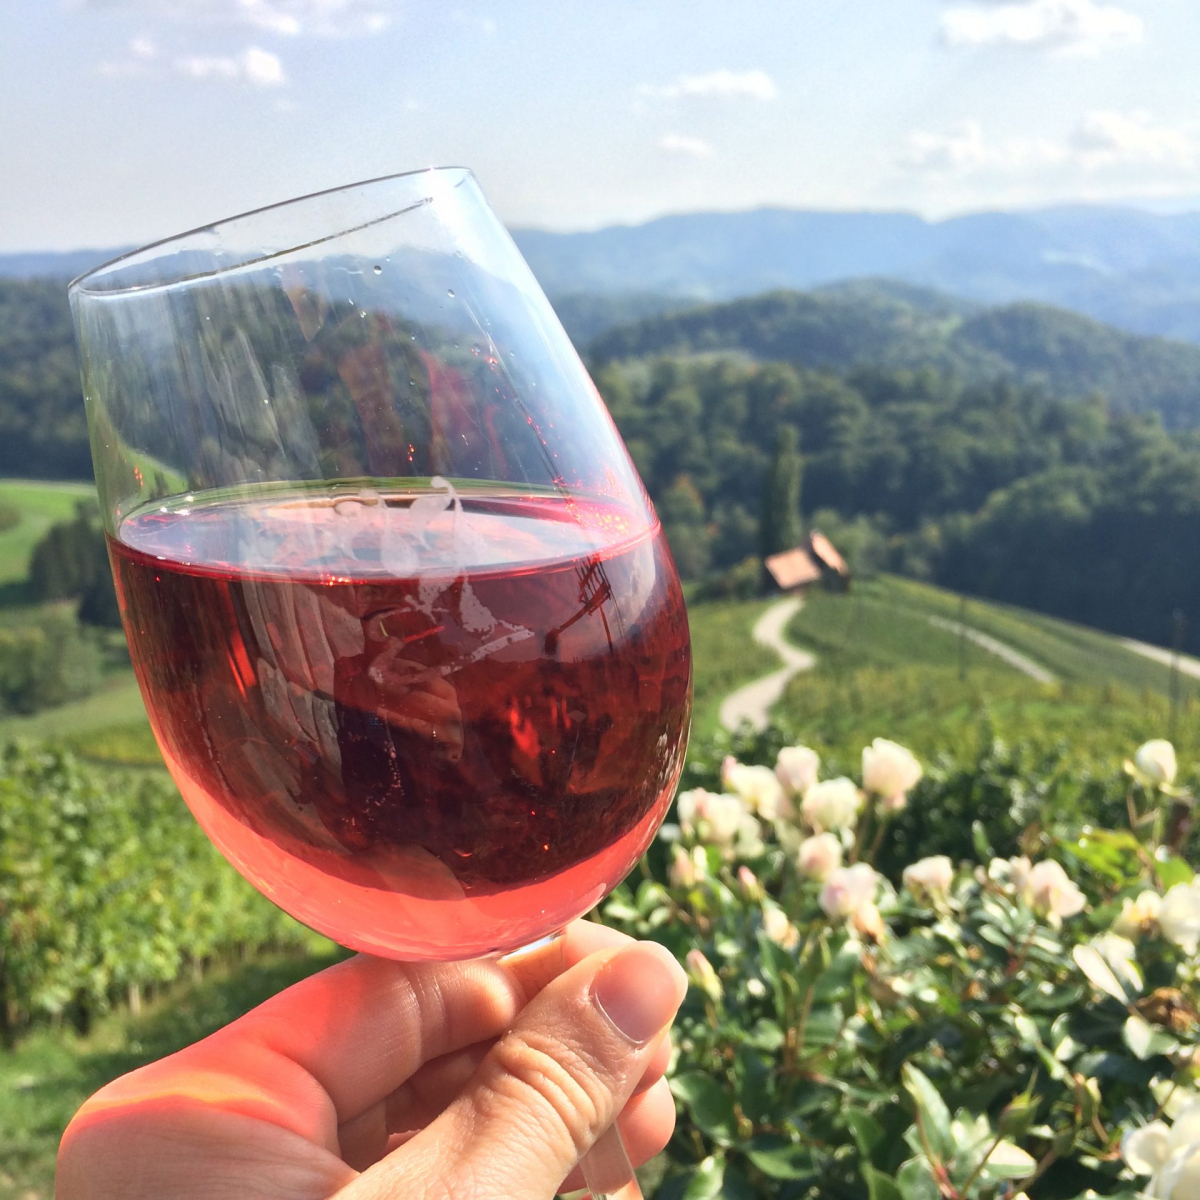 Part of the authentic culture of Slovenia is tasting the amazing wine